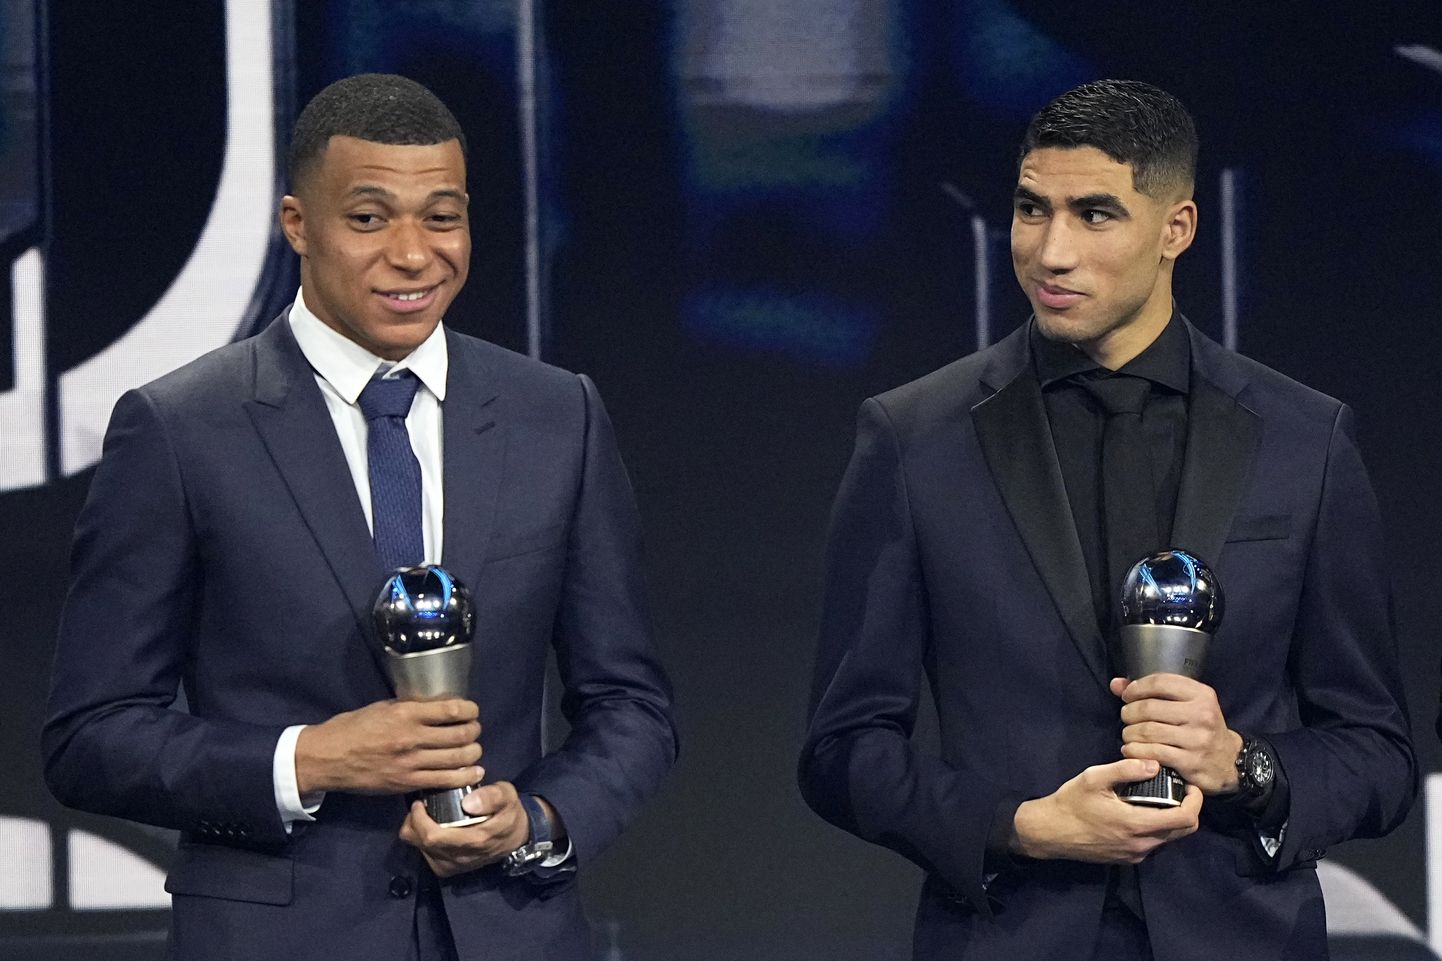 Kylian Mbappe, left, and Achraf Hakimi, pose with trophies Men's World 11 during the ceremony of the Best FIFA Football Awards in Paris, France, Monday, Feb. 27, 2023. (AP Photo/Michel Euler)  XDMV150